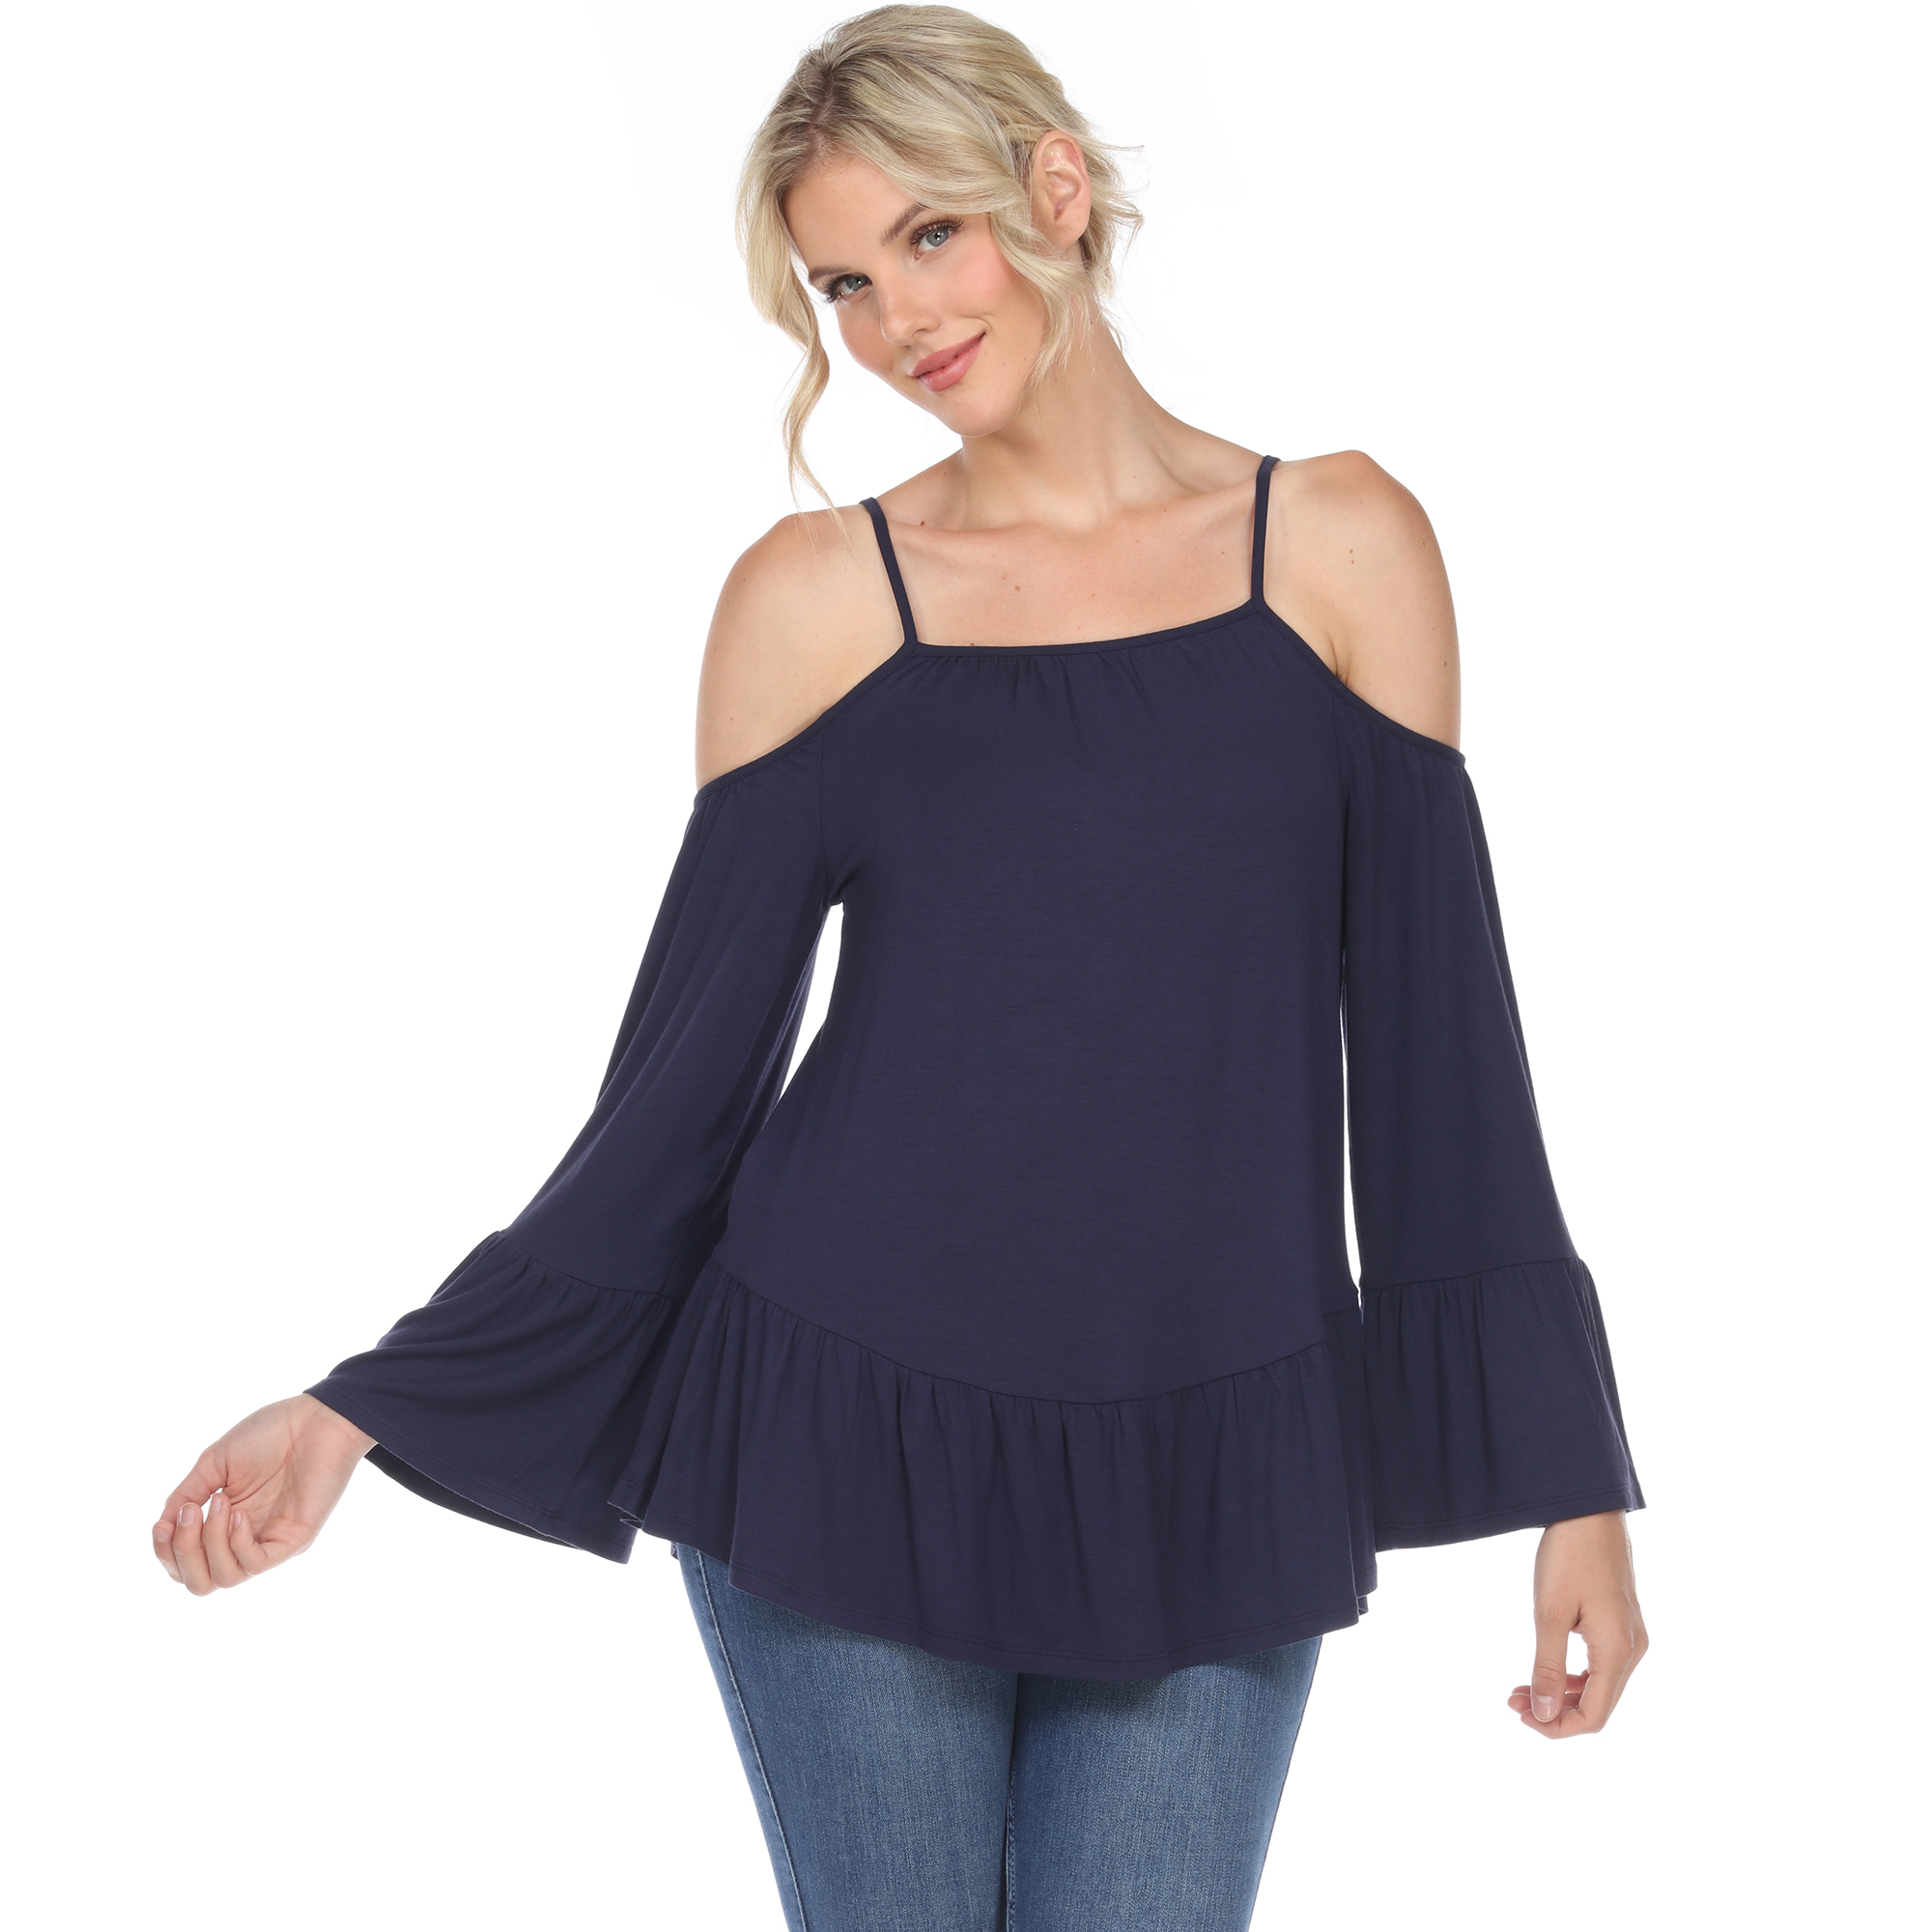 White Mark Women's Cold Shoulder Ruffle Sleeve Top - Navy, 1X